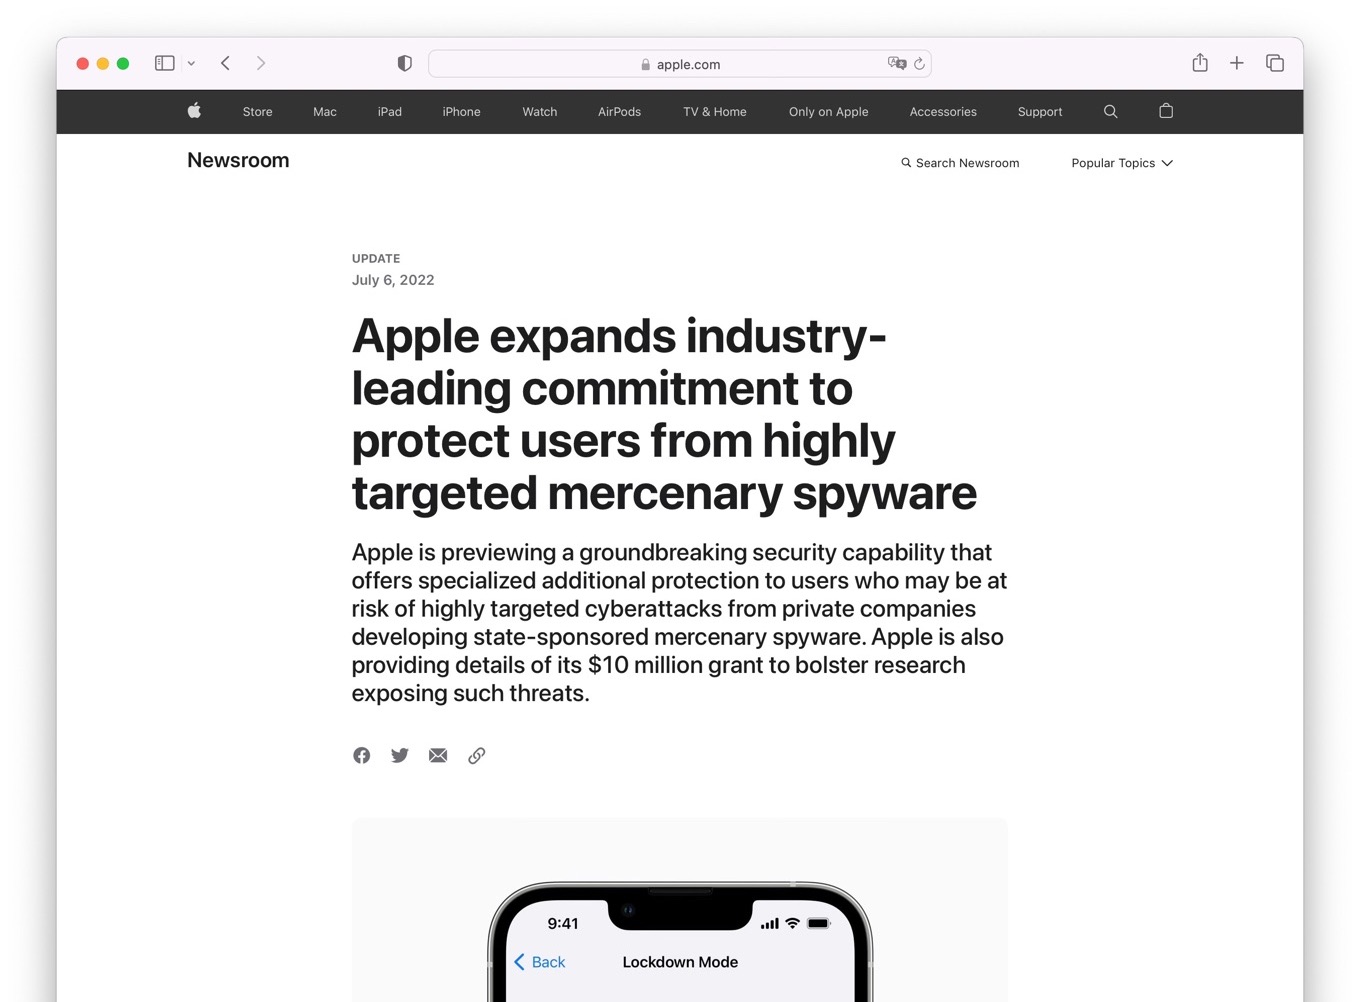 Apple expands industry-leading commitment to protect users from highly targeted mercenary spyware